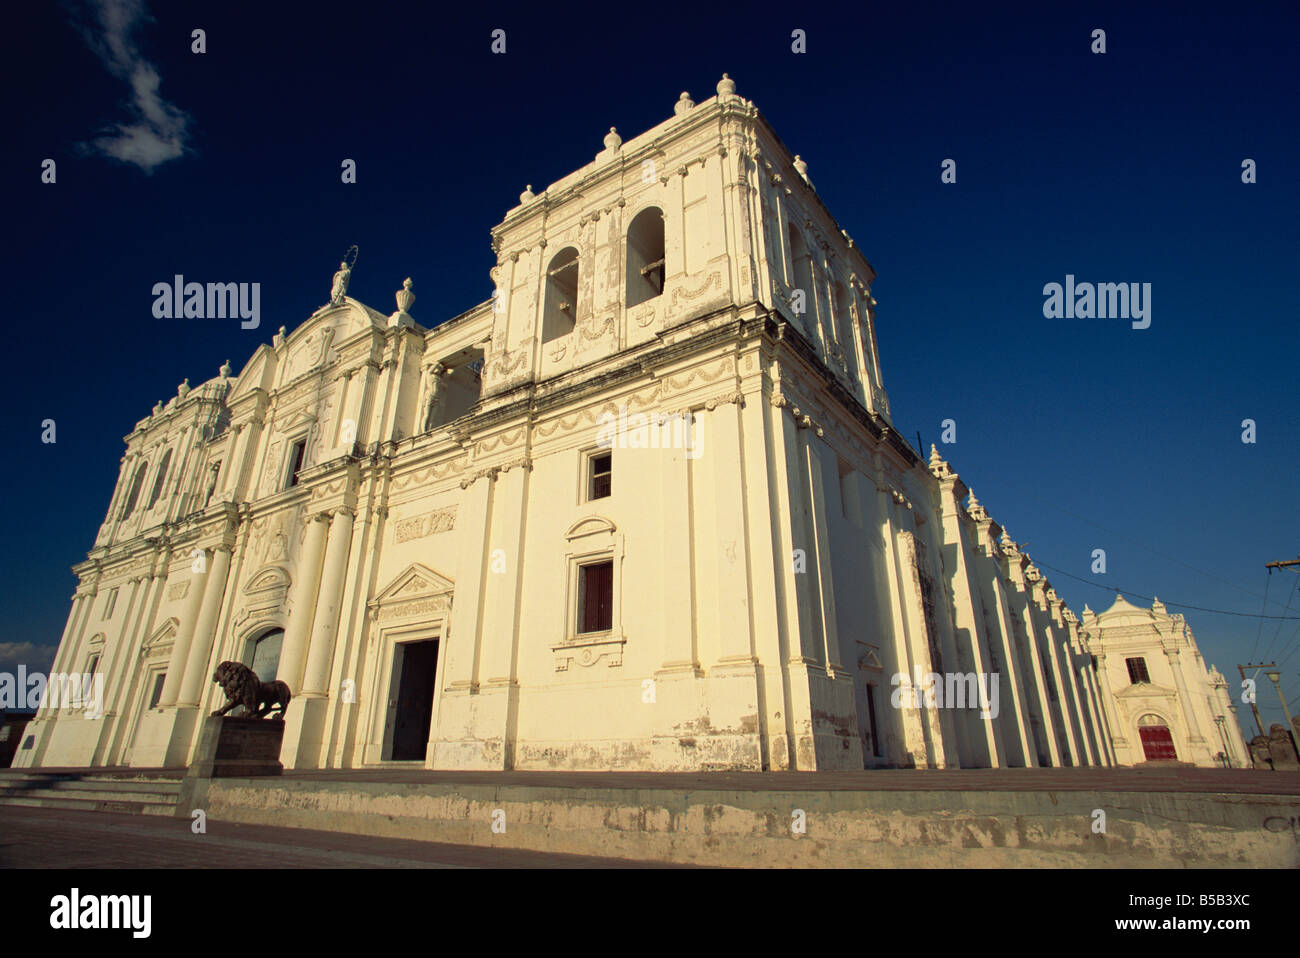 Cathedral which took a hundred years to build from 1746, Parque Jerez, Leon, Nicaragua, Central America Stock Photo